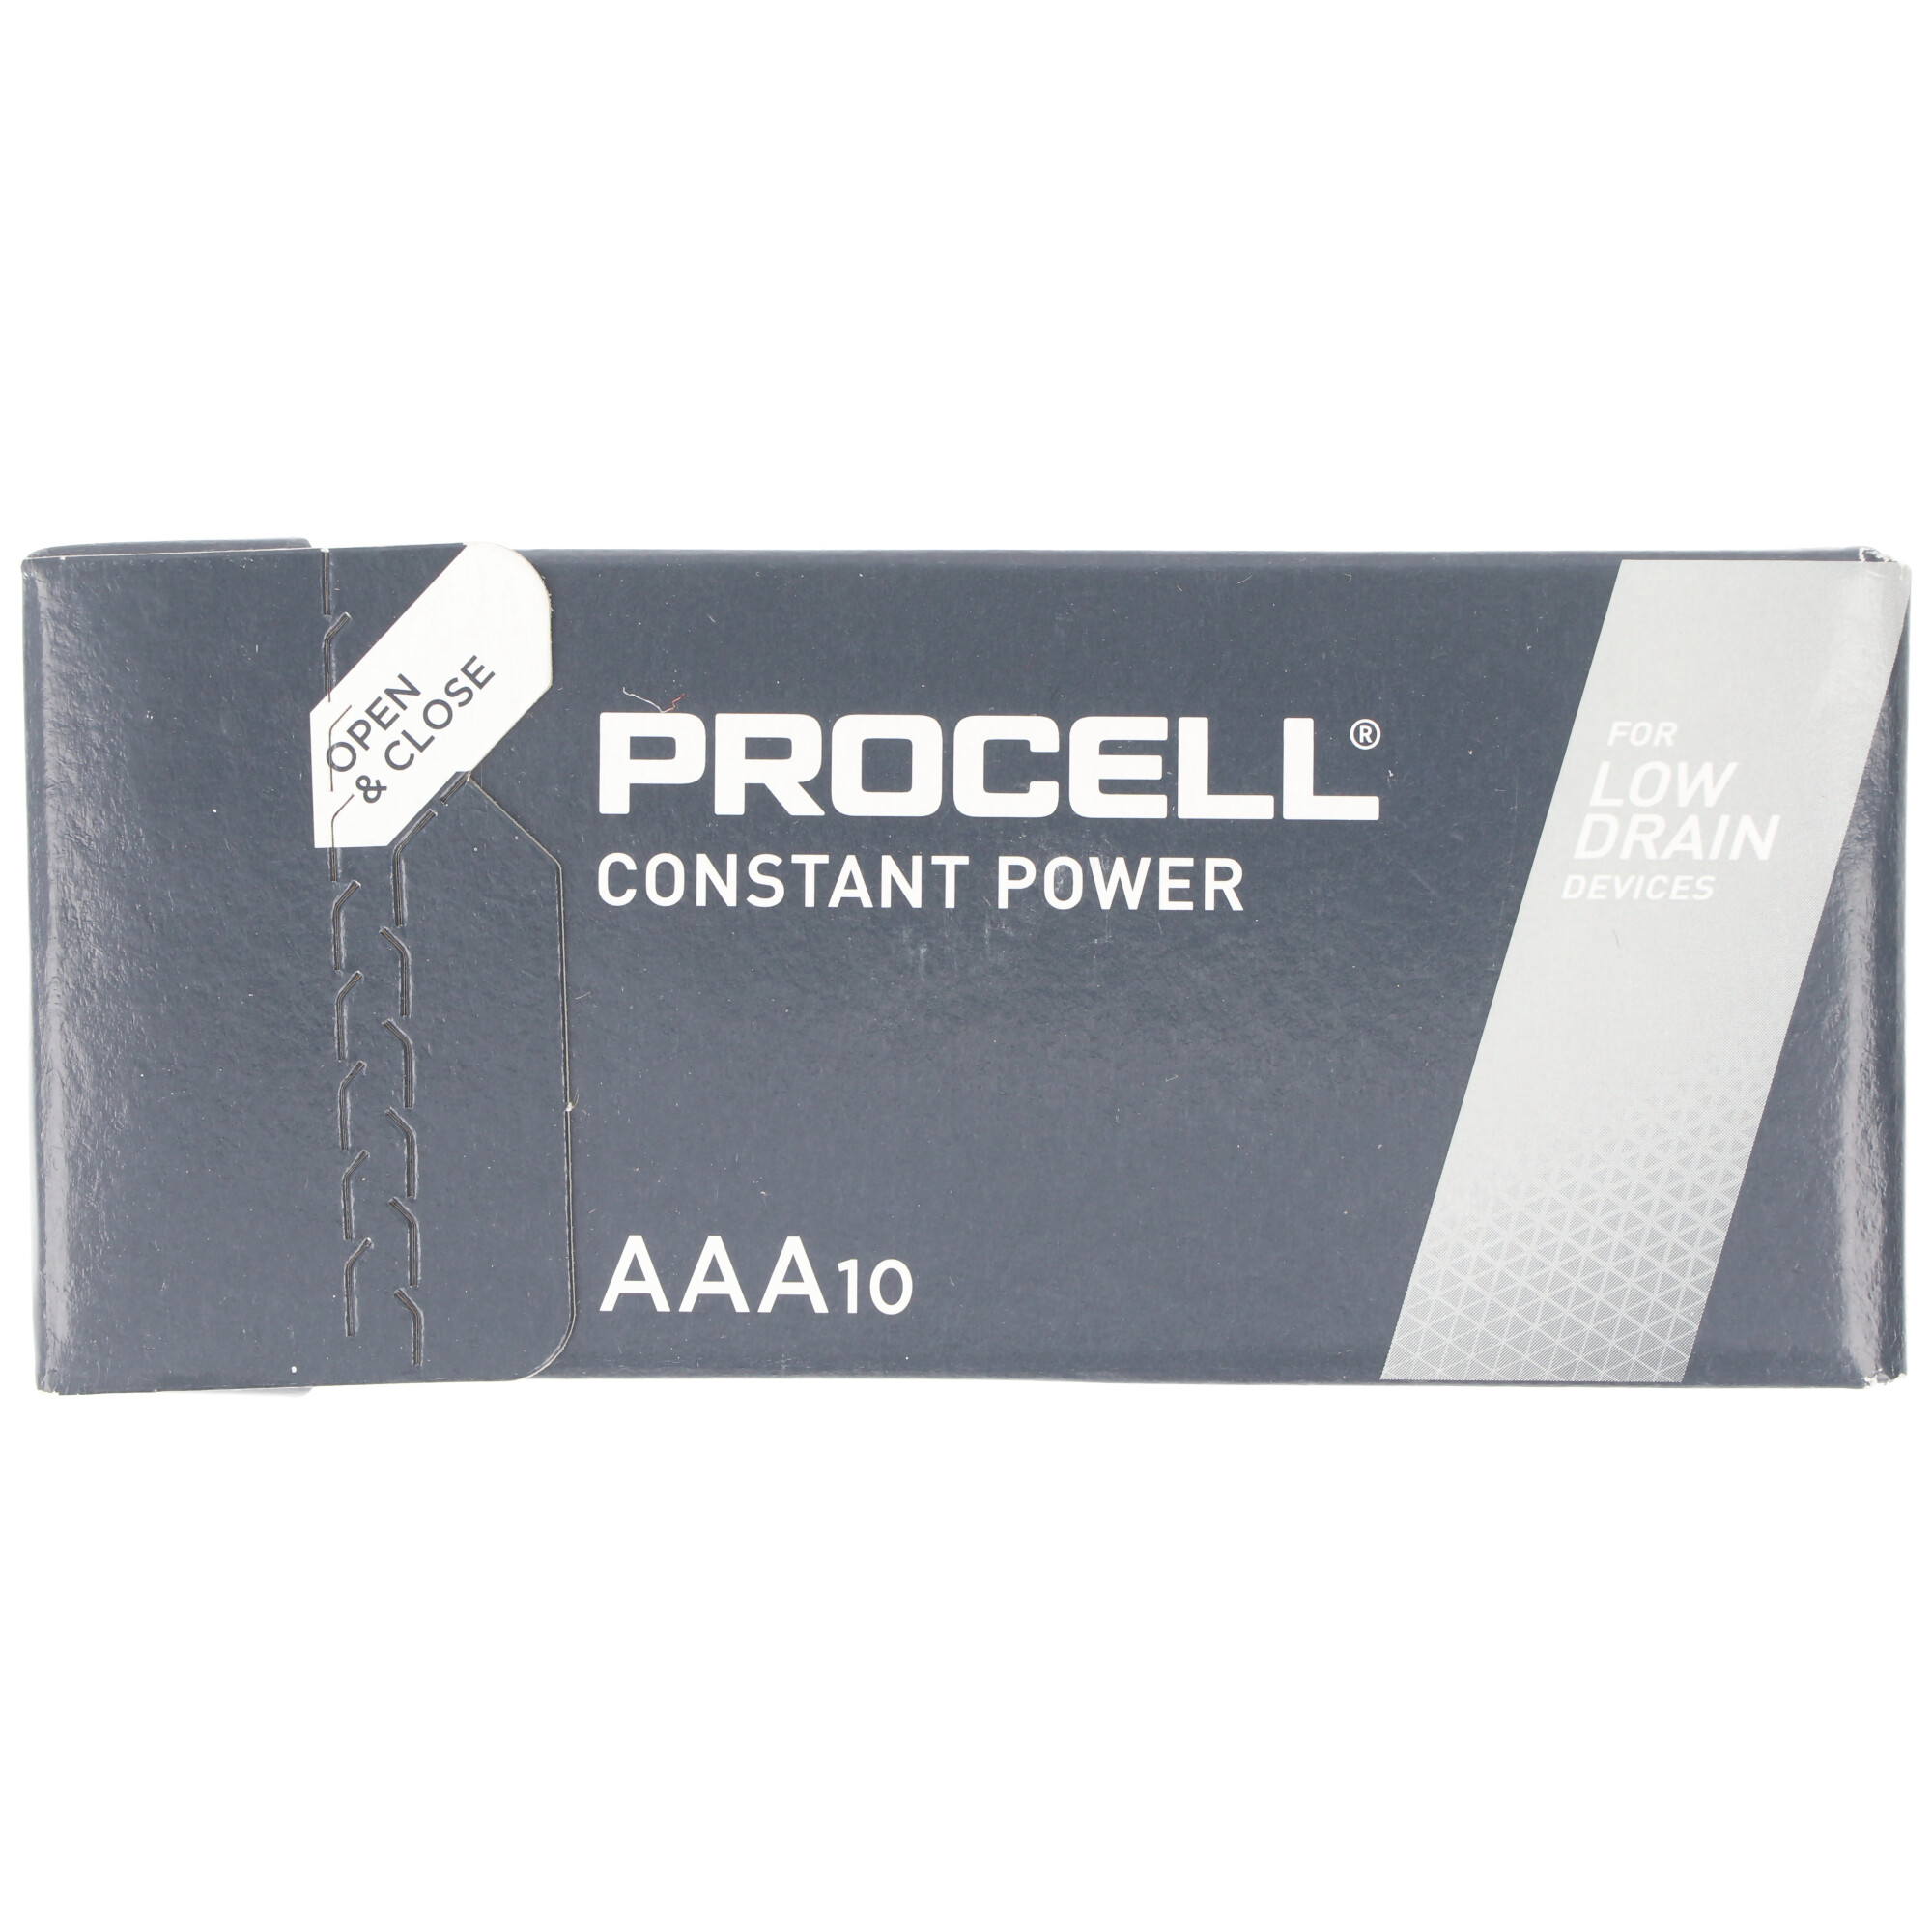 Duracell Batterie Alkaline, Micro, AAA, LR03, 1.5V Procell Constant, Retail Box (10-Pack)